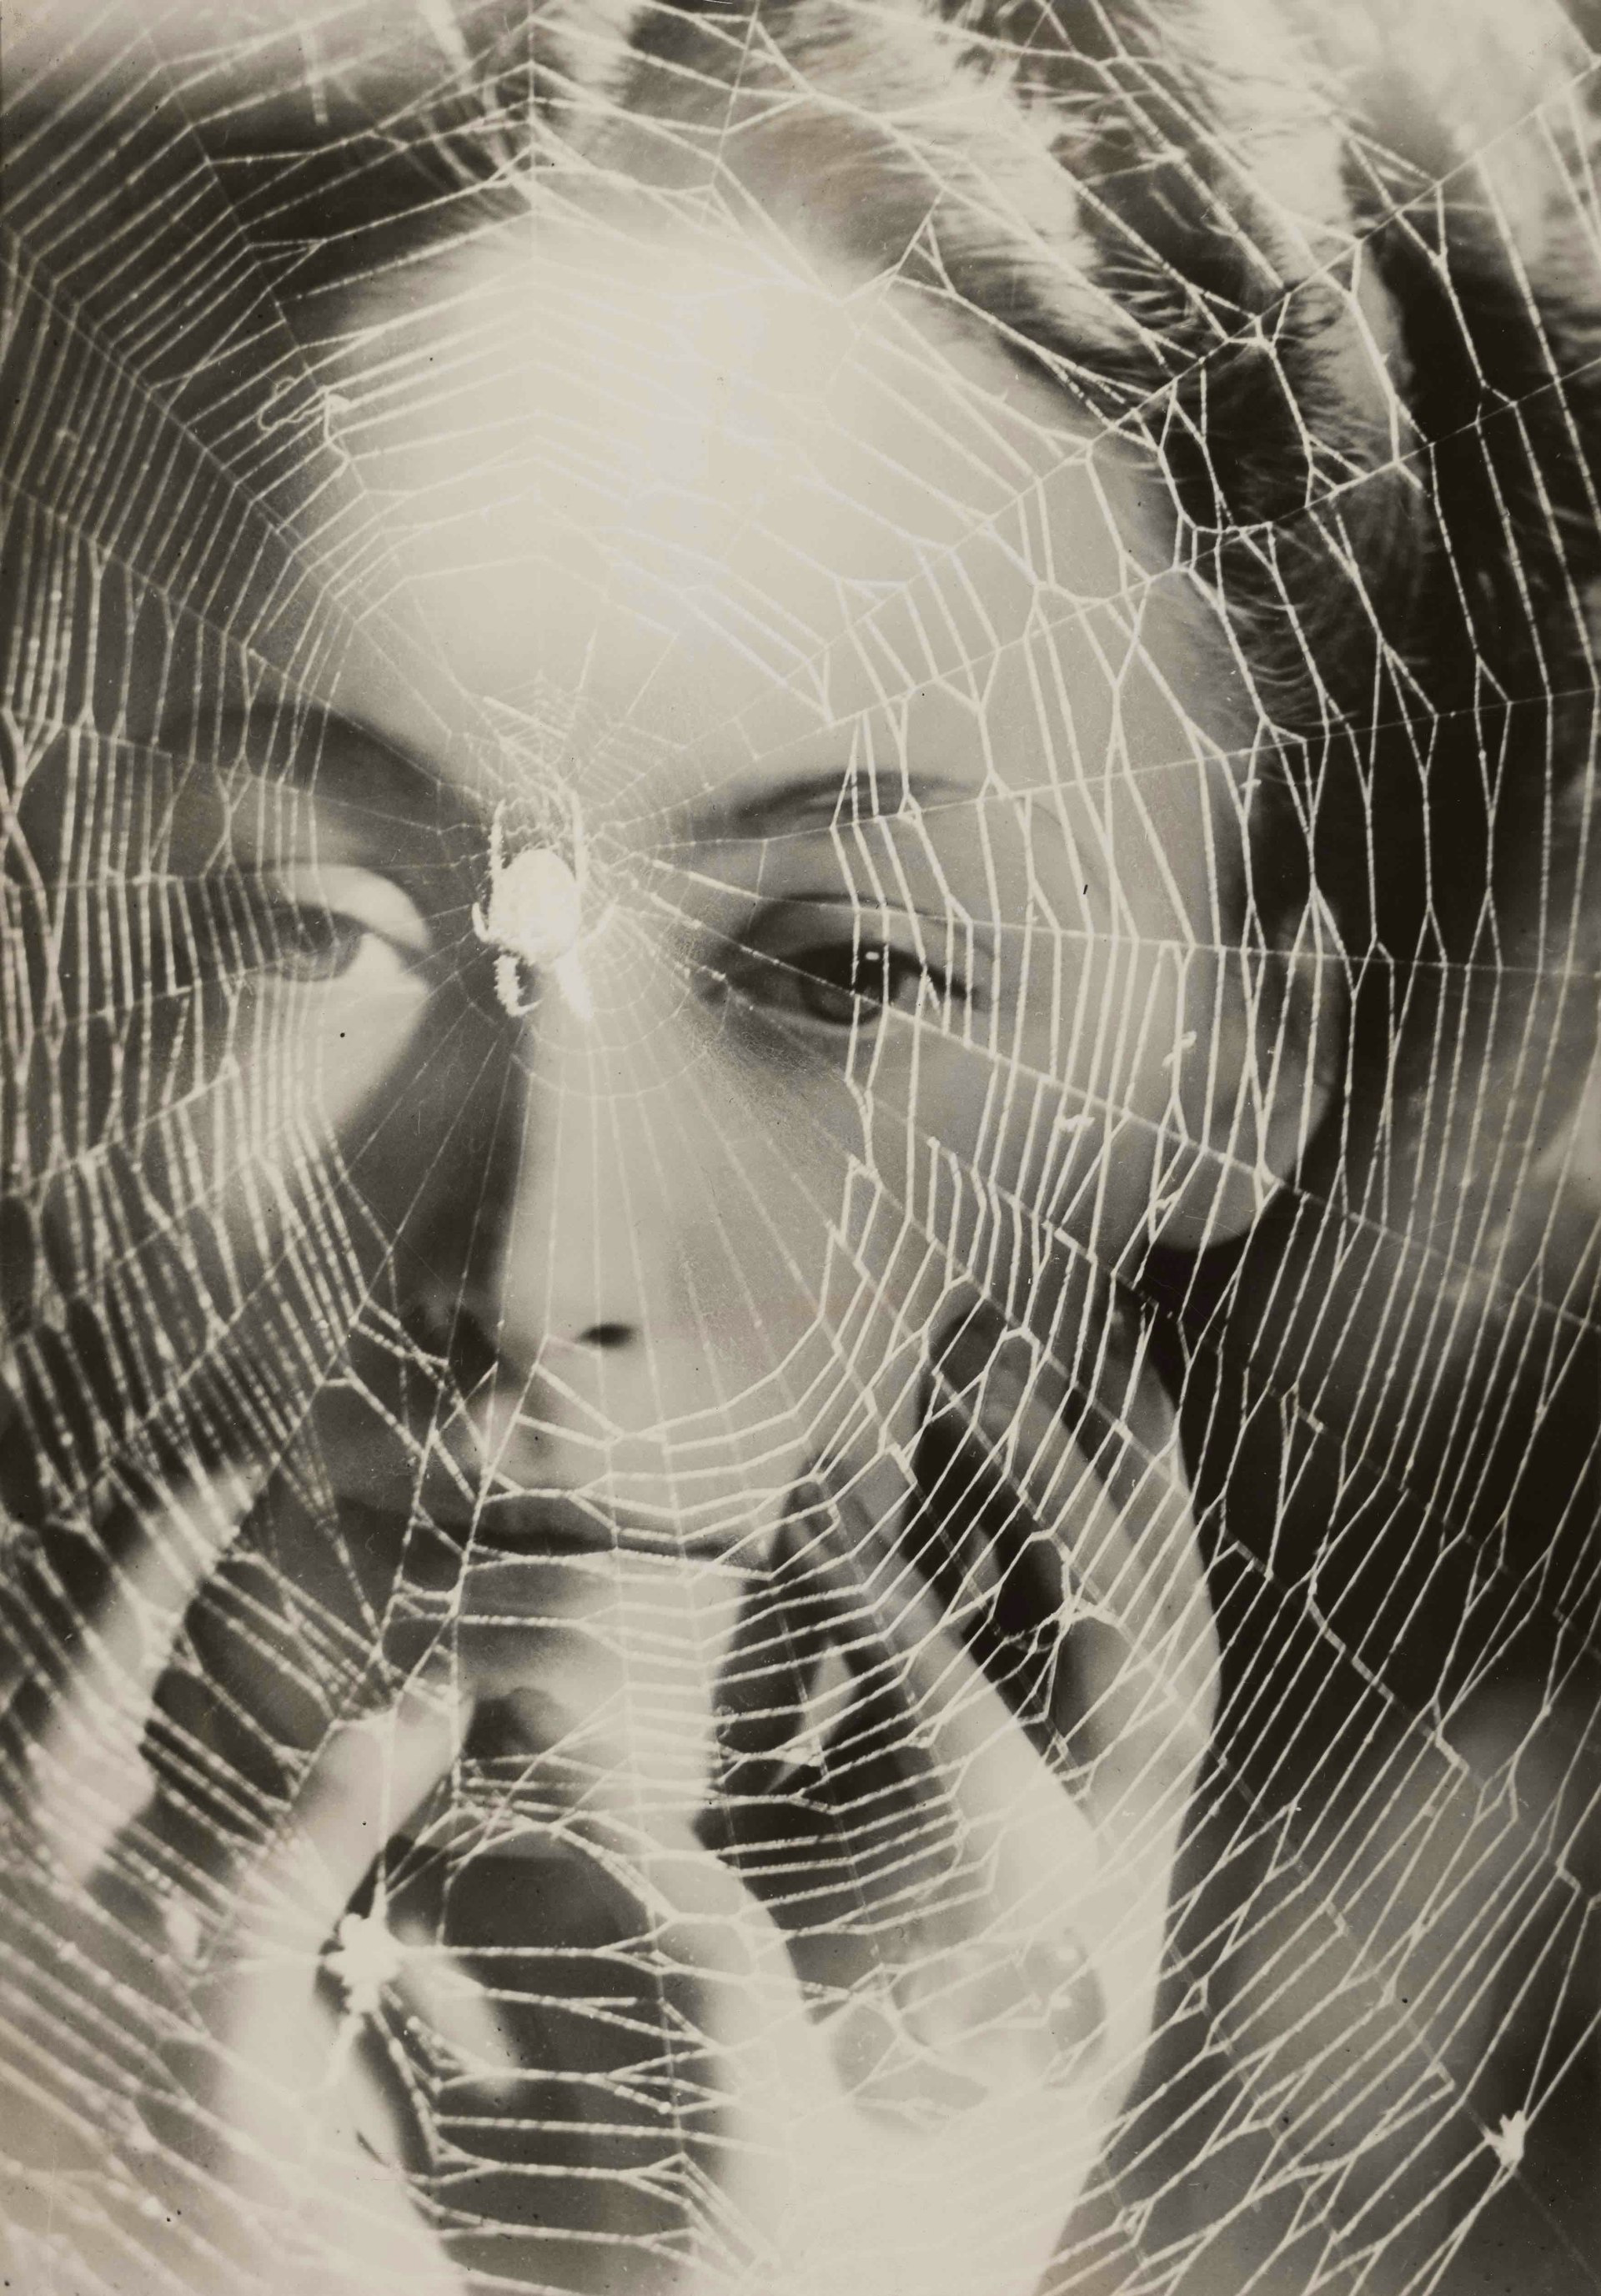 The woman who transformed photography in the ’30s